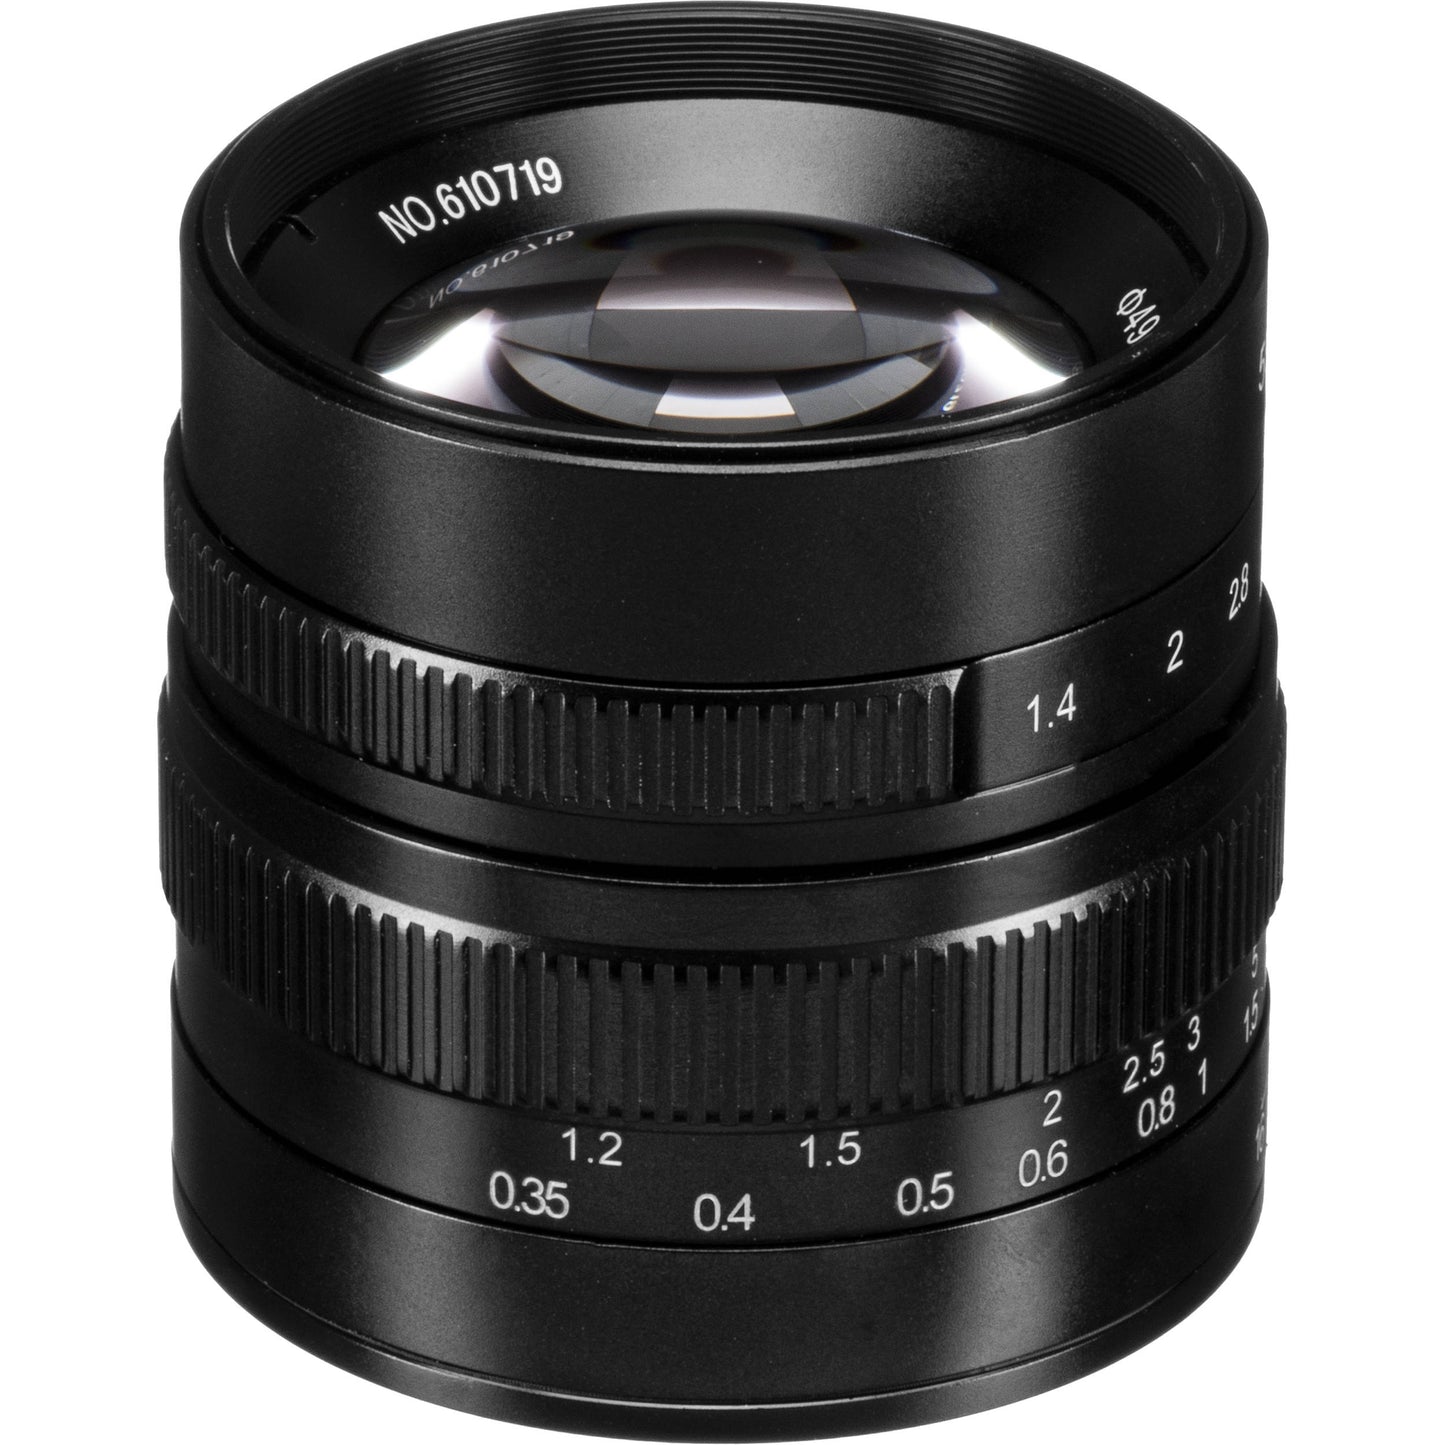 7Artisans 55mm f1.4 Photoelectric APS-C Manual Prime Lens for Panasonic/Olympus Micro Four Thirds MFT M4/3 Mirrorless Cameras with Bokeh Effect